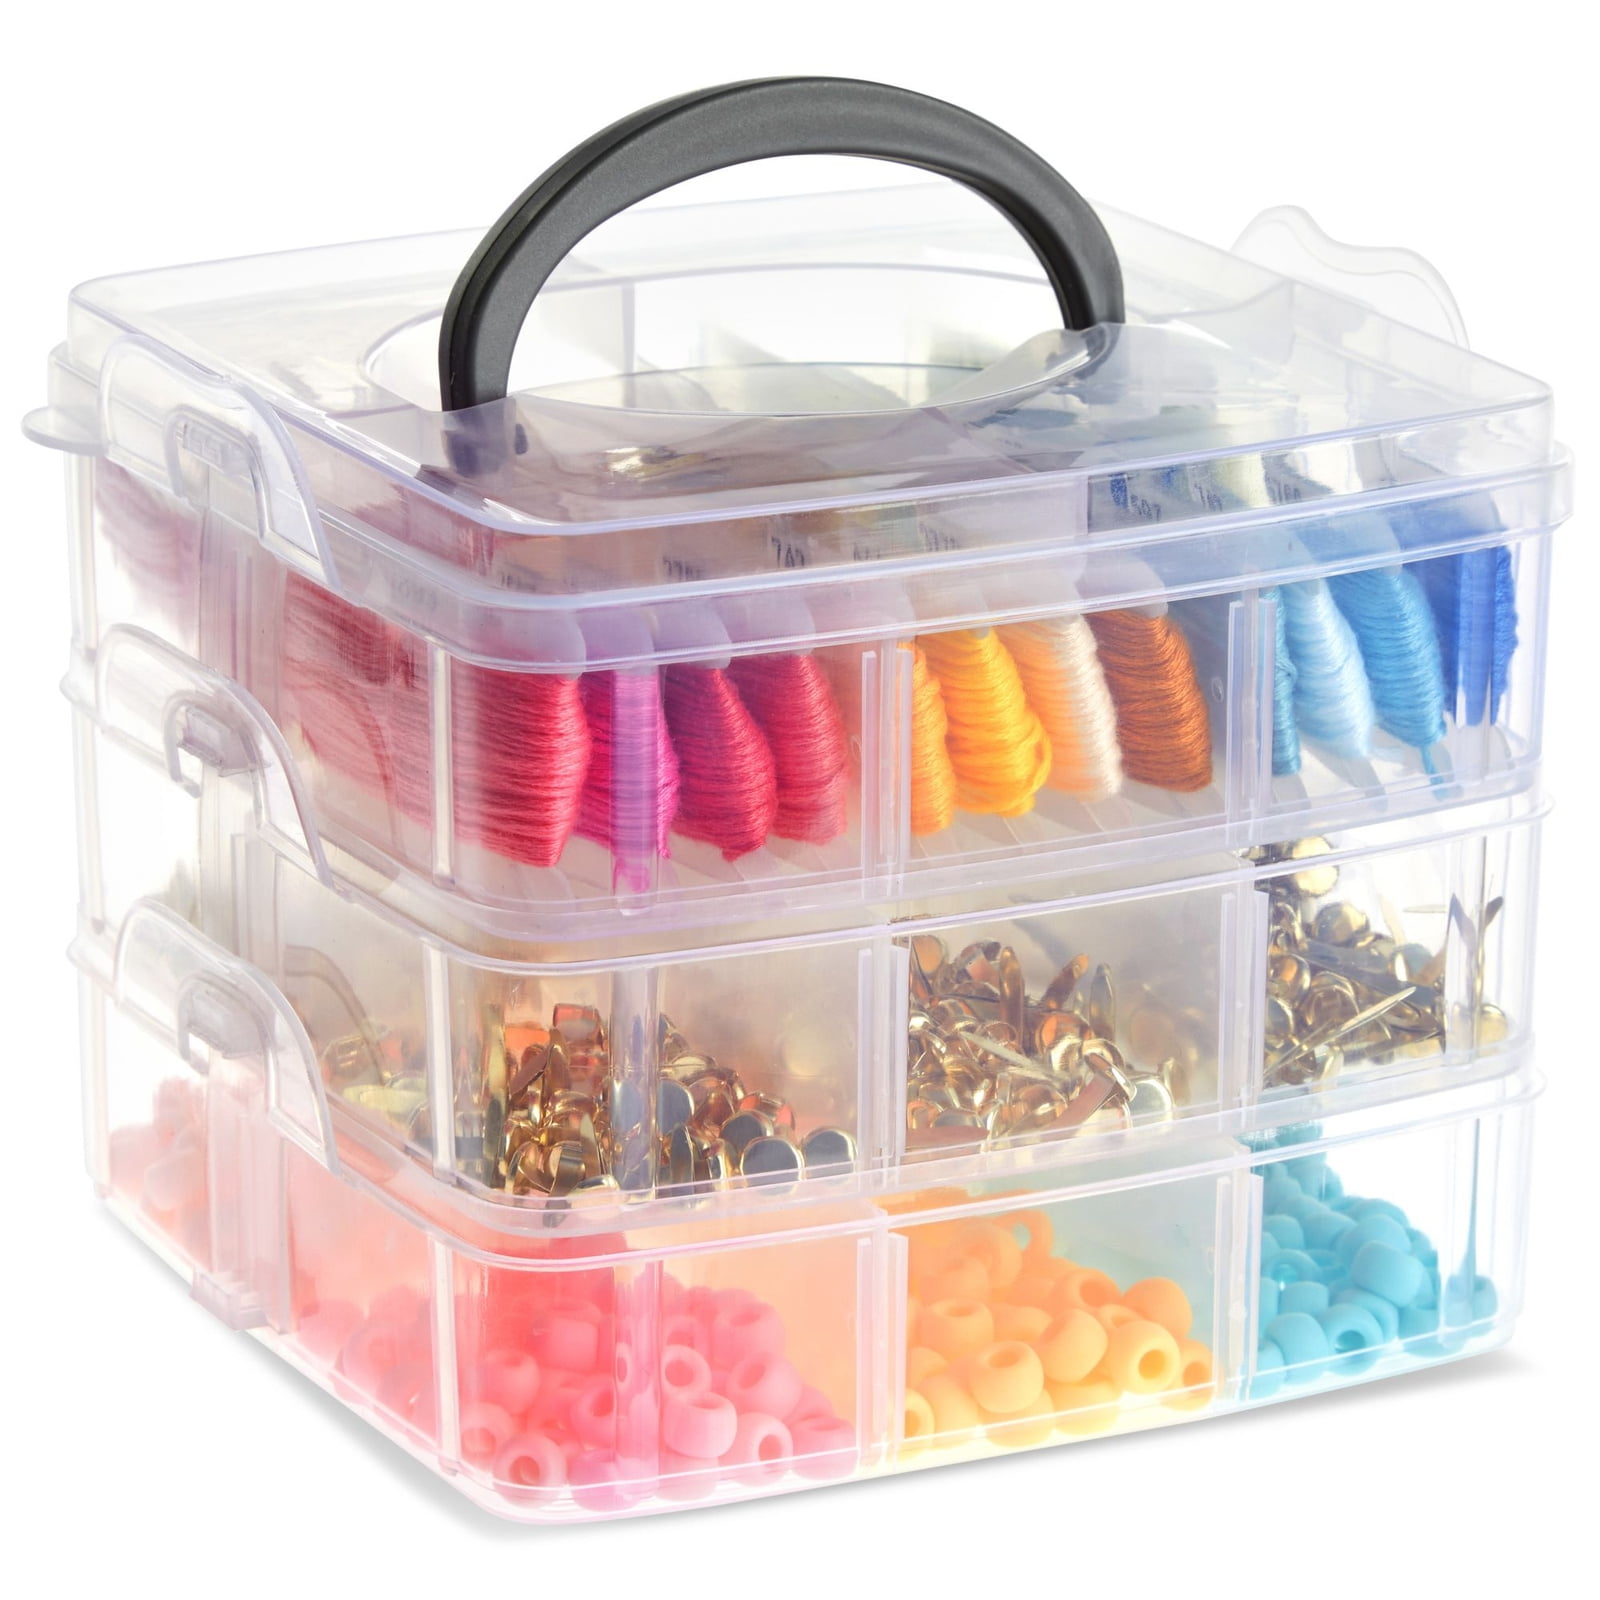 Topboutique 3-Layer Things & Crafts Storage Box with 18 Adjustable Compartments,Plastic Stackable Storage Box for Organizing Embroidery Accessories, Threads